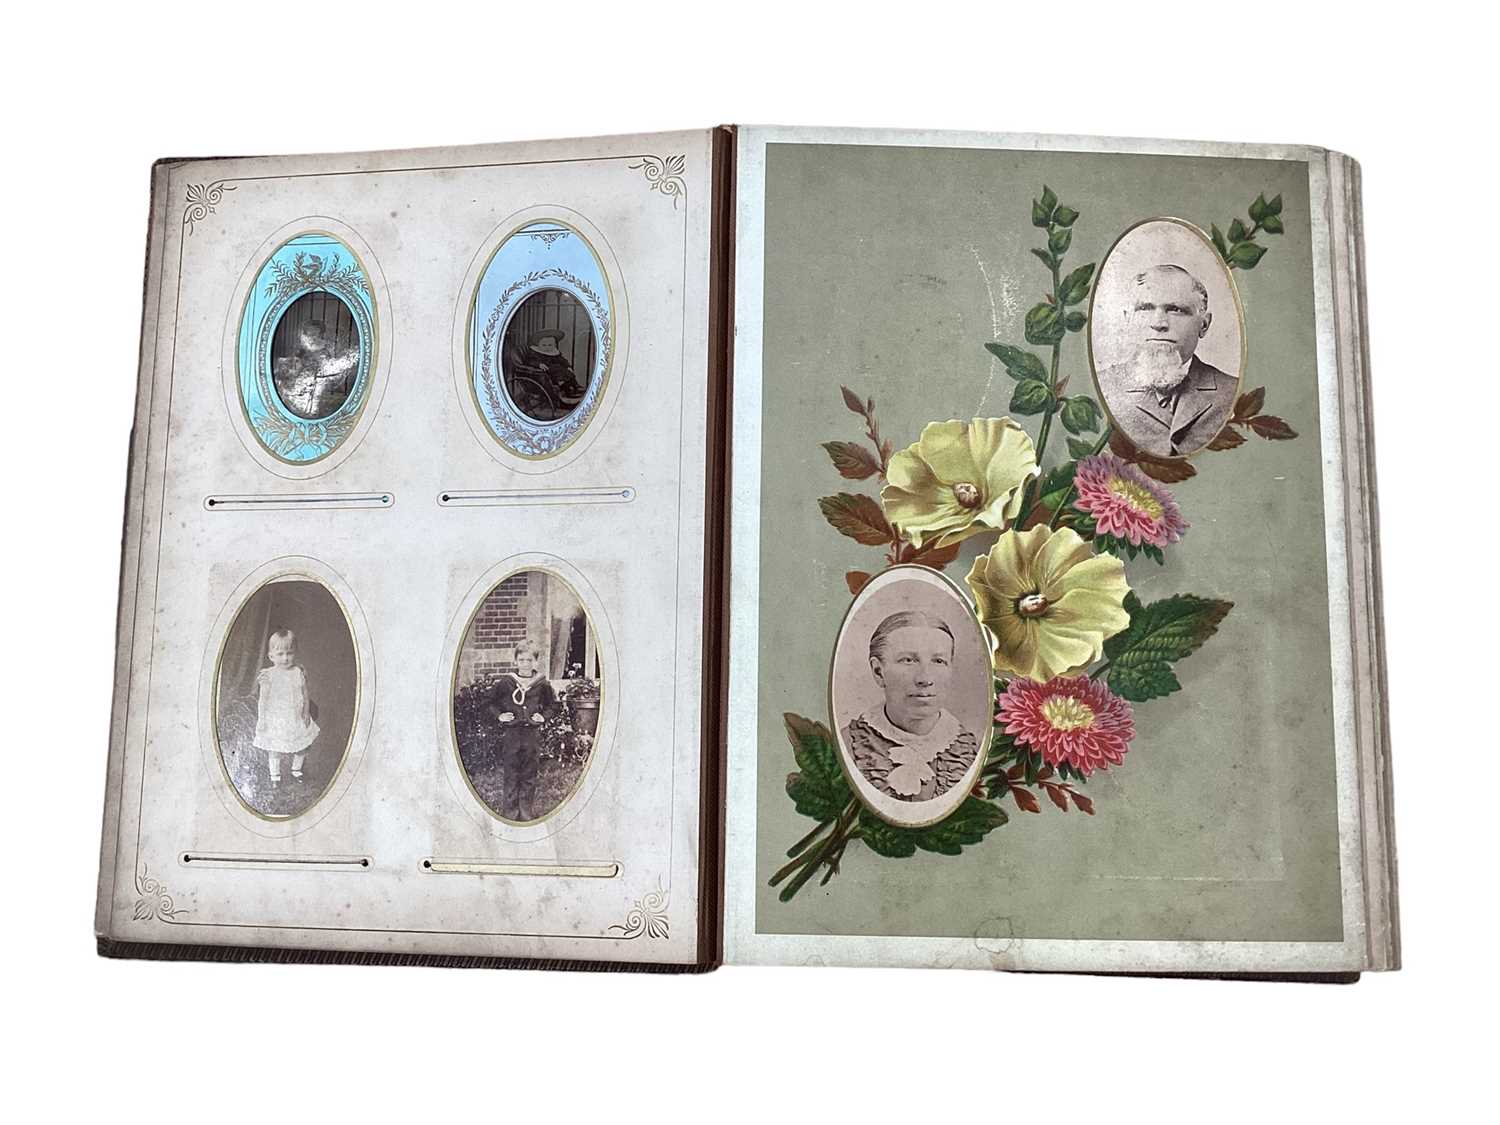 Lot 1598 - Two Victorian leather photograph albums containing various CDV and Cabinet card photographs including an amusing photograph of a man holding an African Grey Parrot.